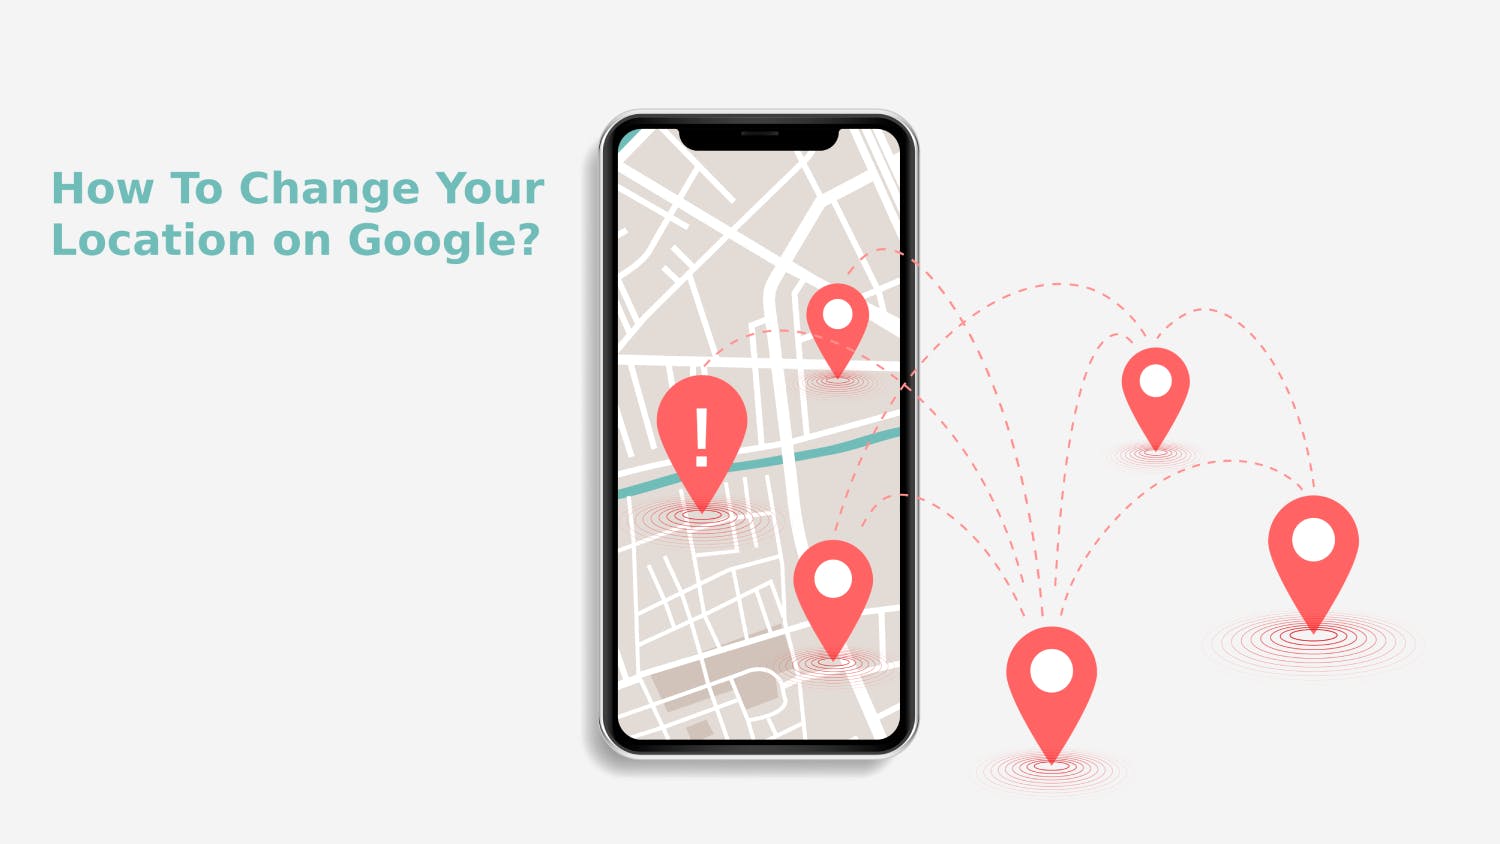 How To Change Your Location on Google?